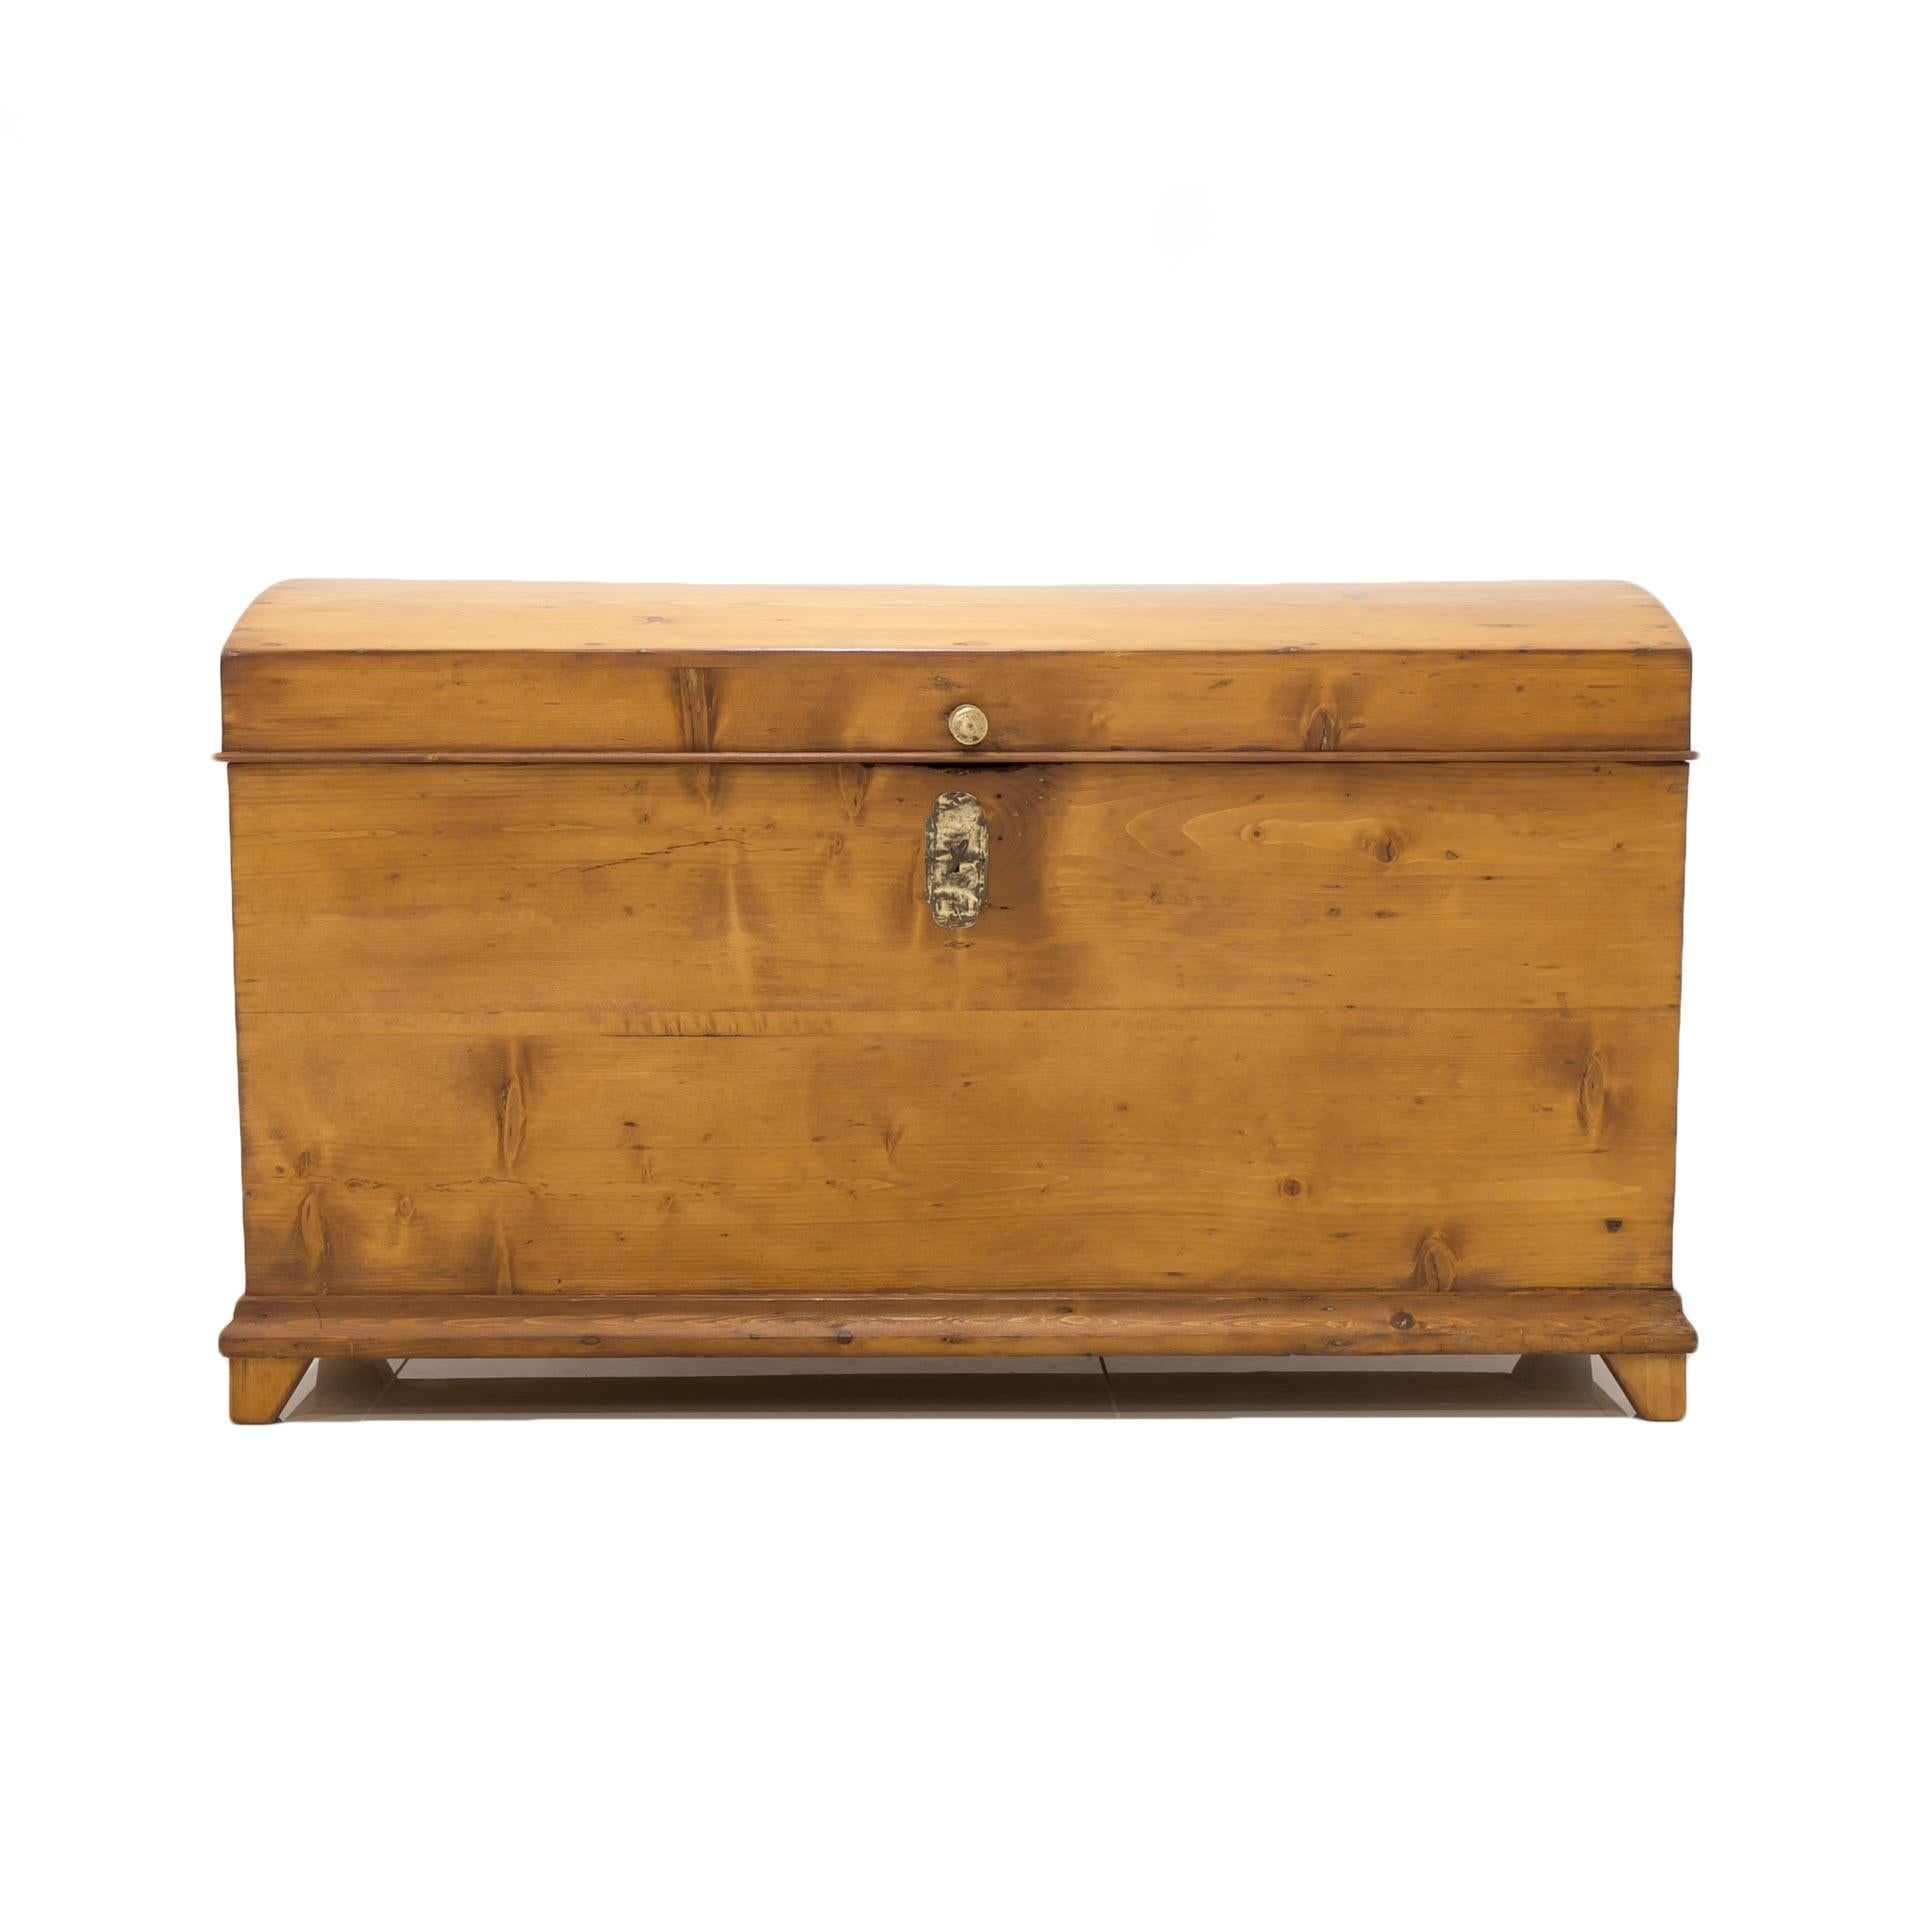 This wooden trunk comes from Poland and was made in 19th century. It is made of spruce wood and has been refinished with natural wax-oil that brought out natural charm and warmth of the wood. It is lockable with a key in original lock and features